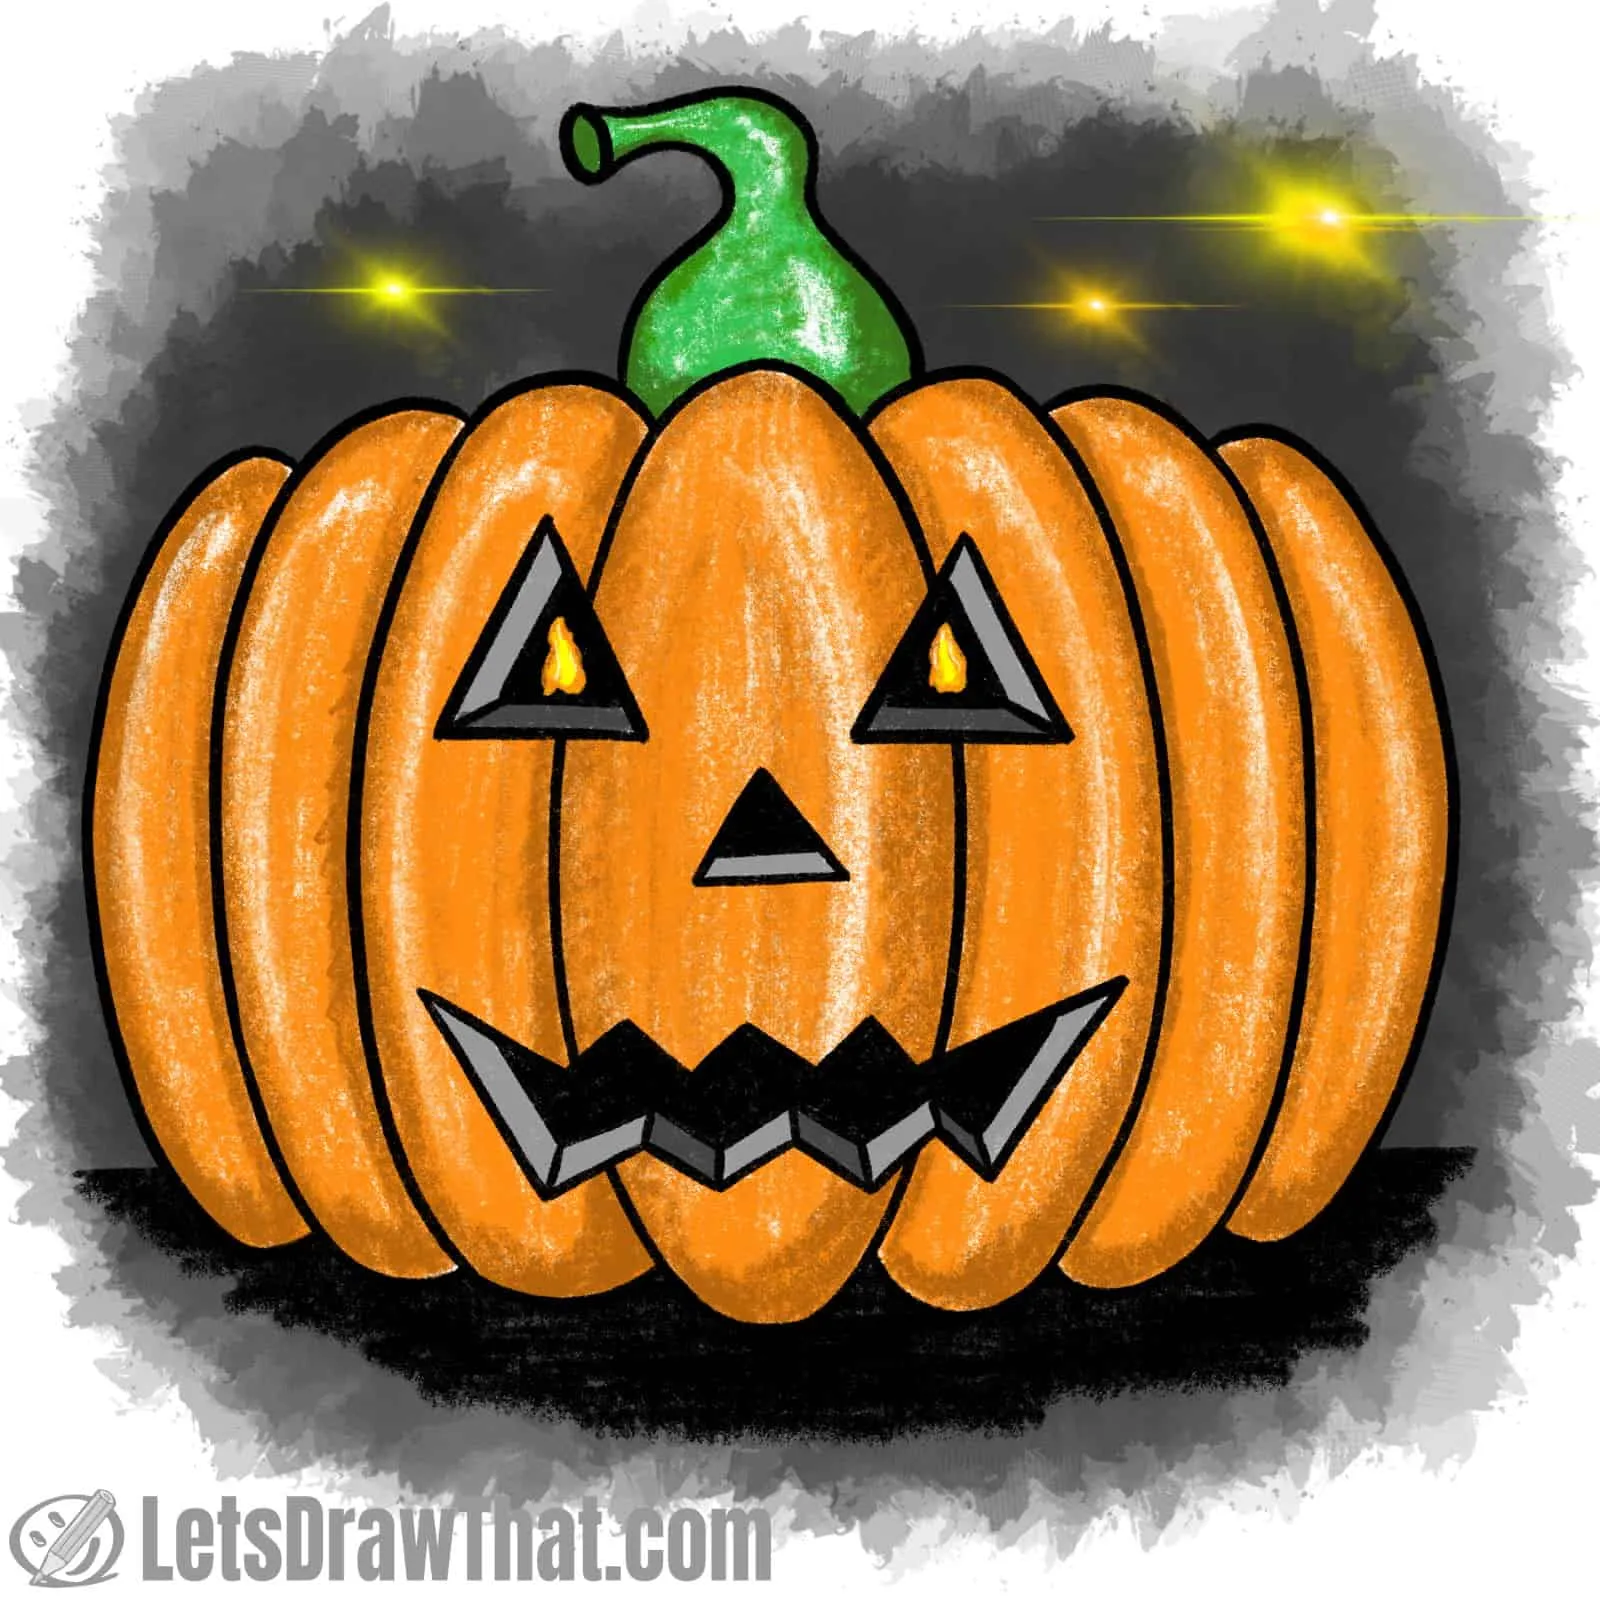 Drawing pumpkin faces: finished classic pumpkin face drawing coloured-in